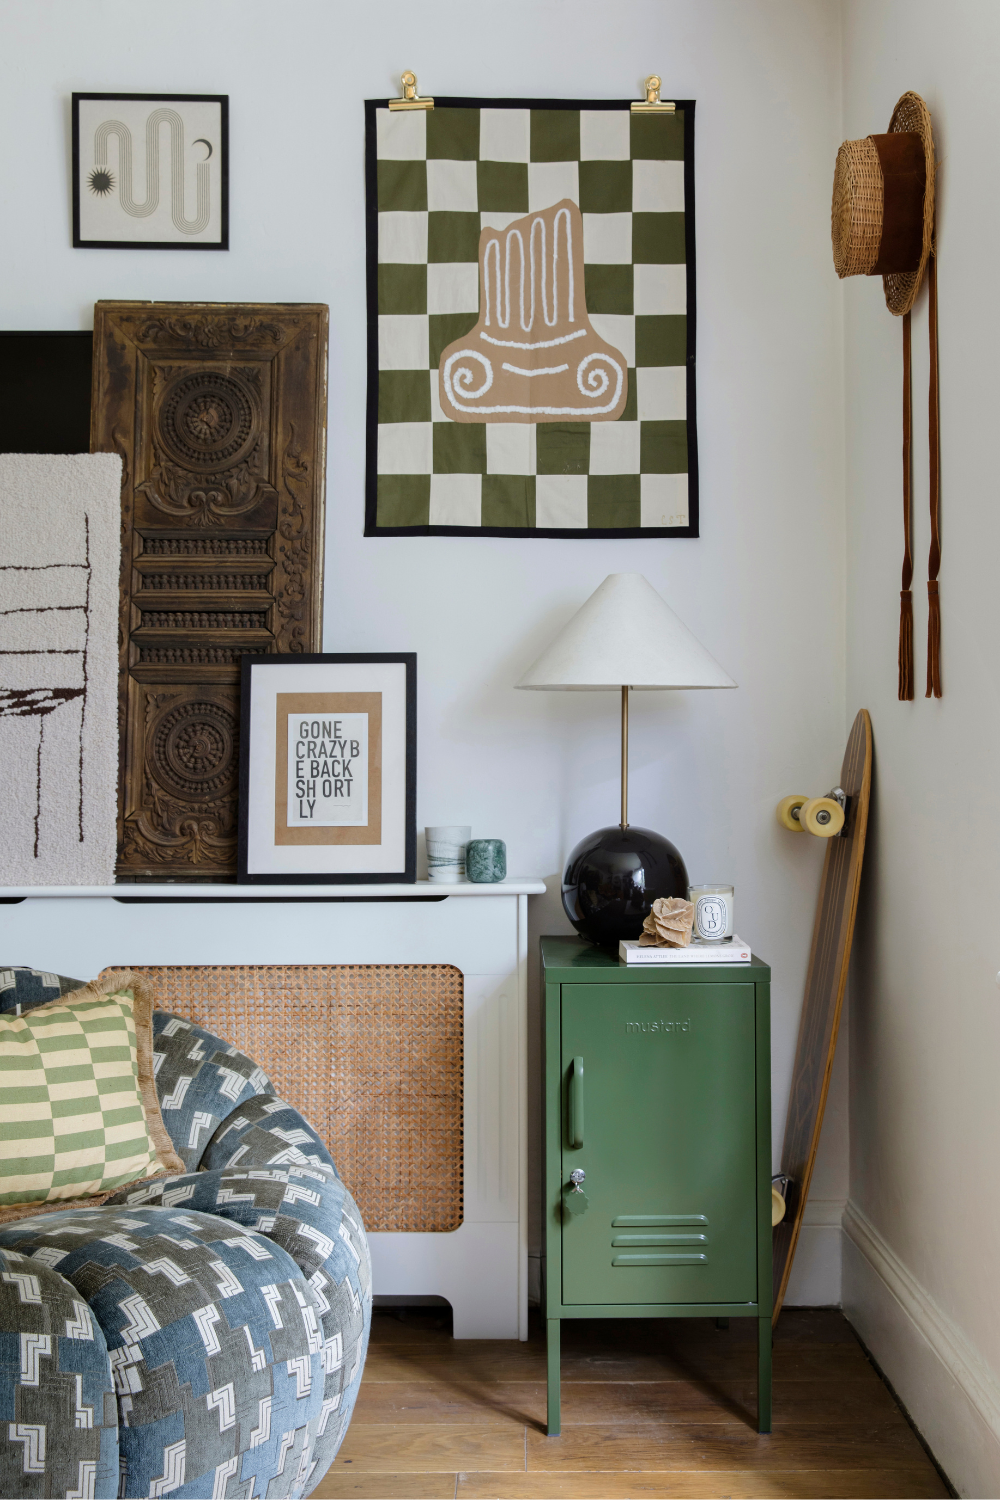 An Olive Shorty is arranged in a room styled in green and earth tones. An art print reads 'gone crazy be back shortly.'